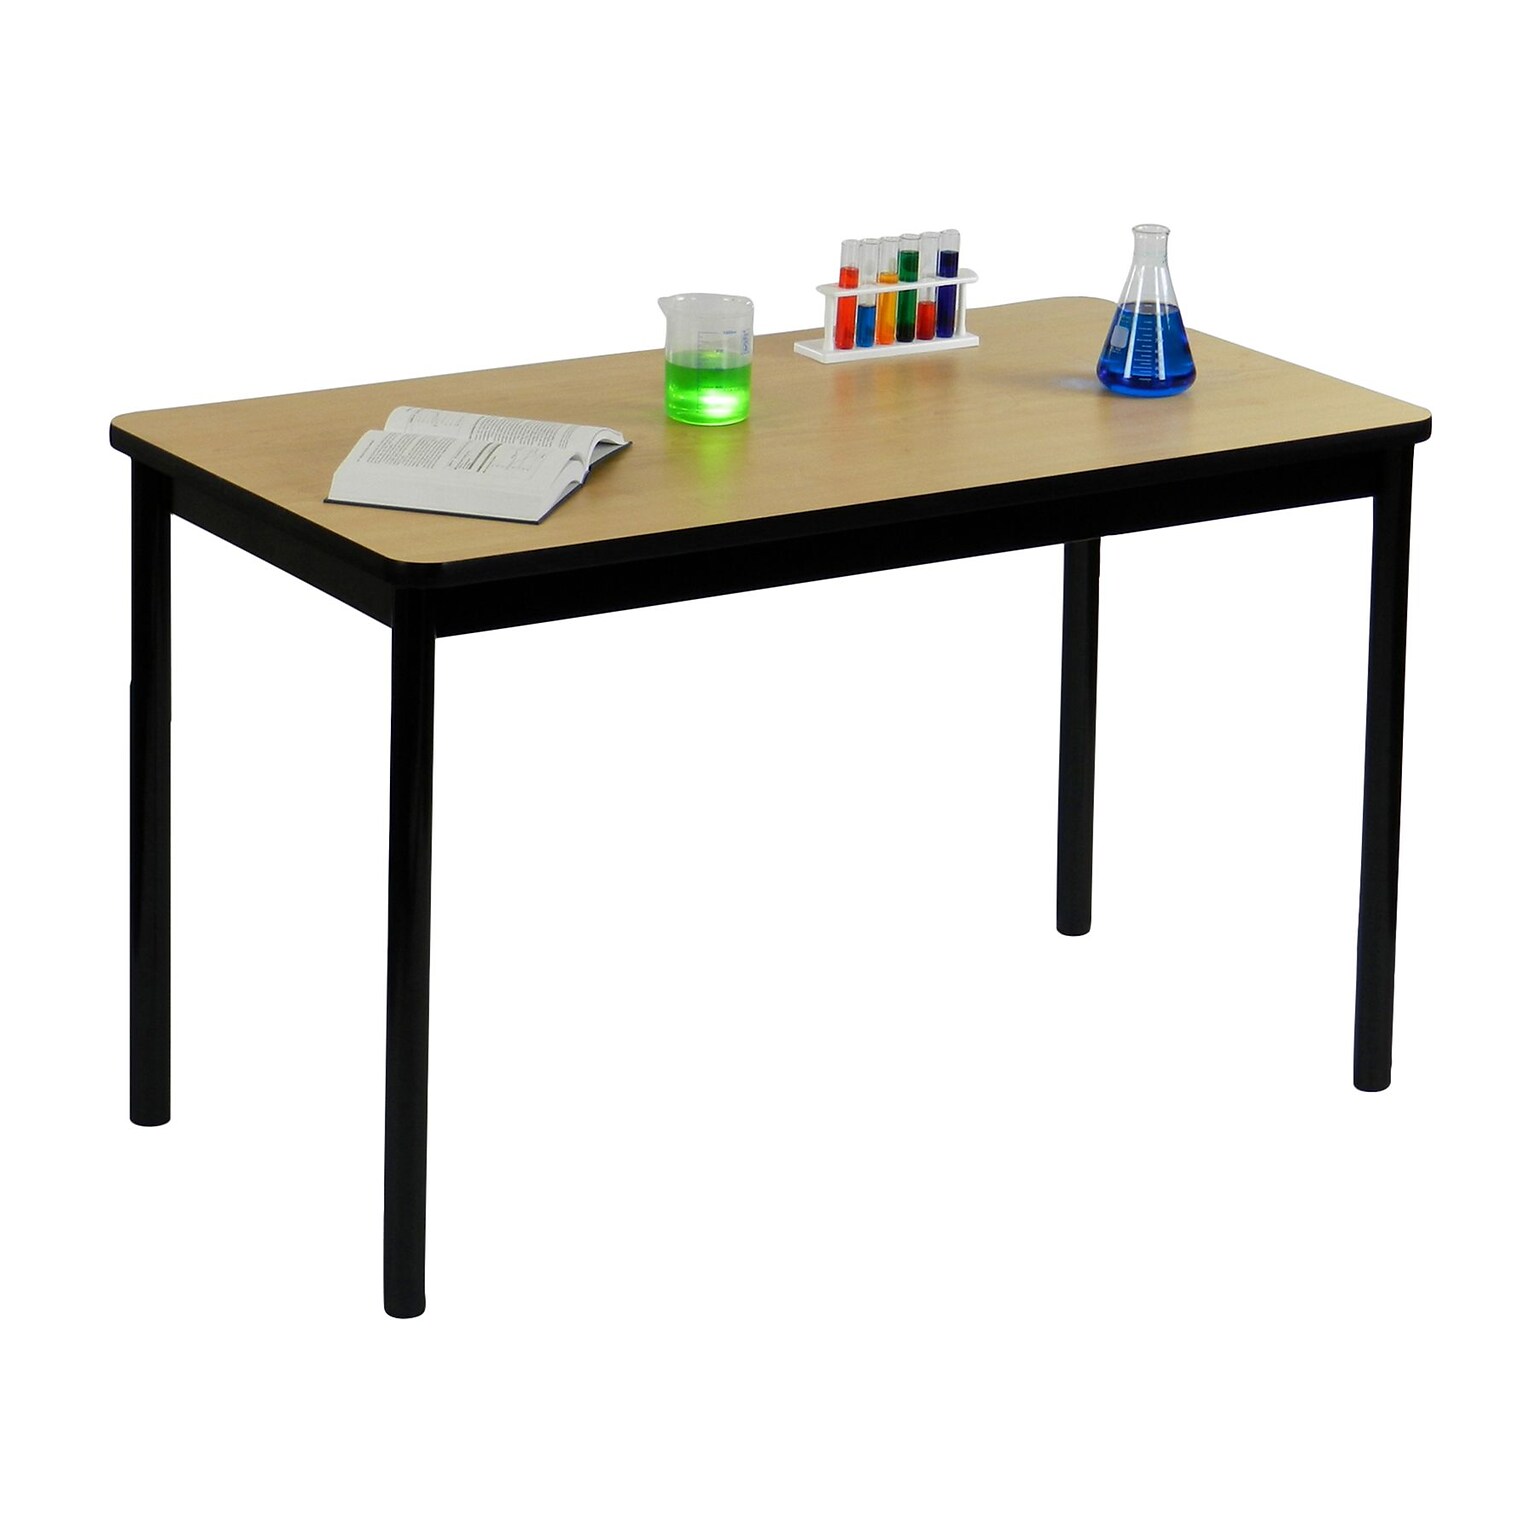 Correll, Inc. 72 Rectangular Shape High-Pressure Laminate Top Lab Table, Fusion Maple with Black Frame (LT3072-16)